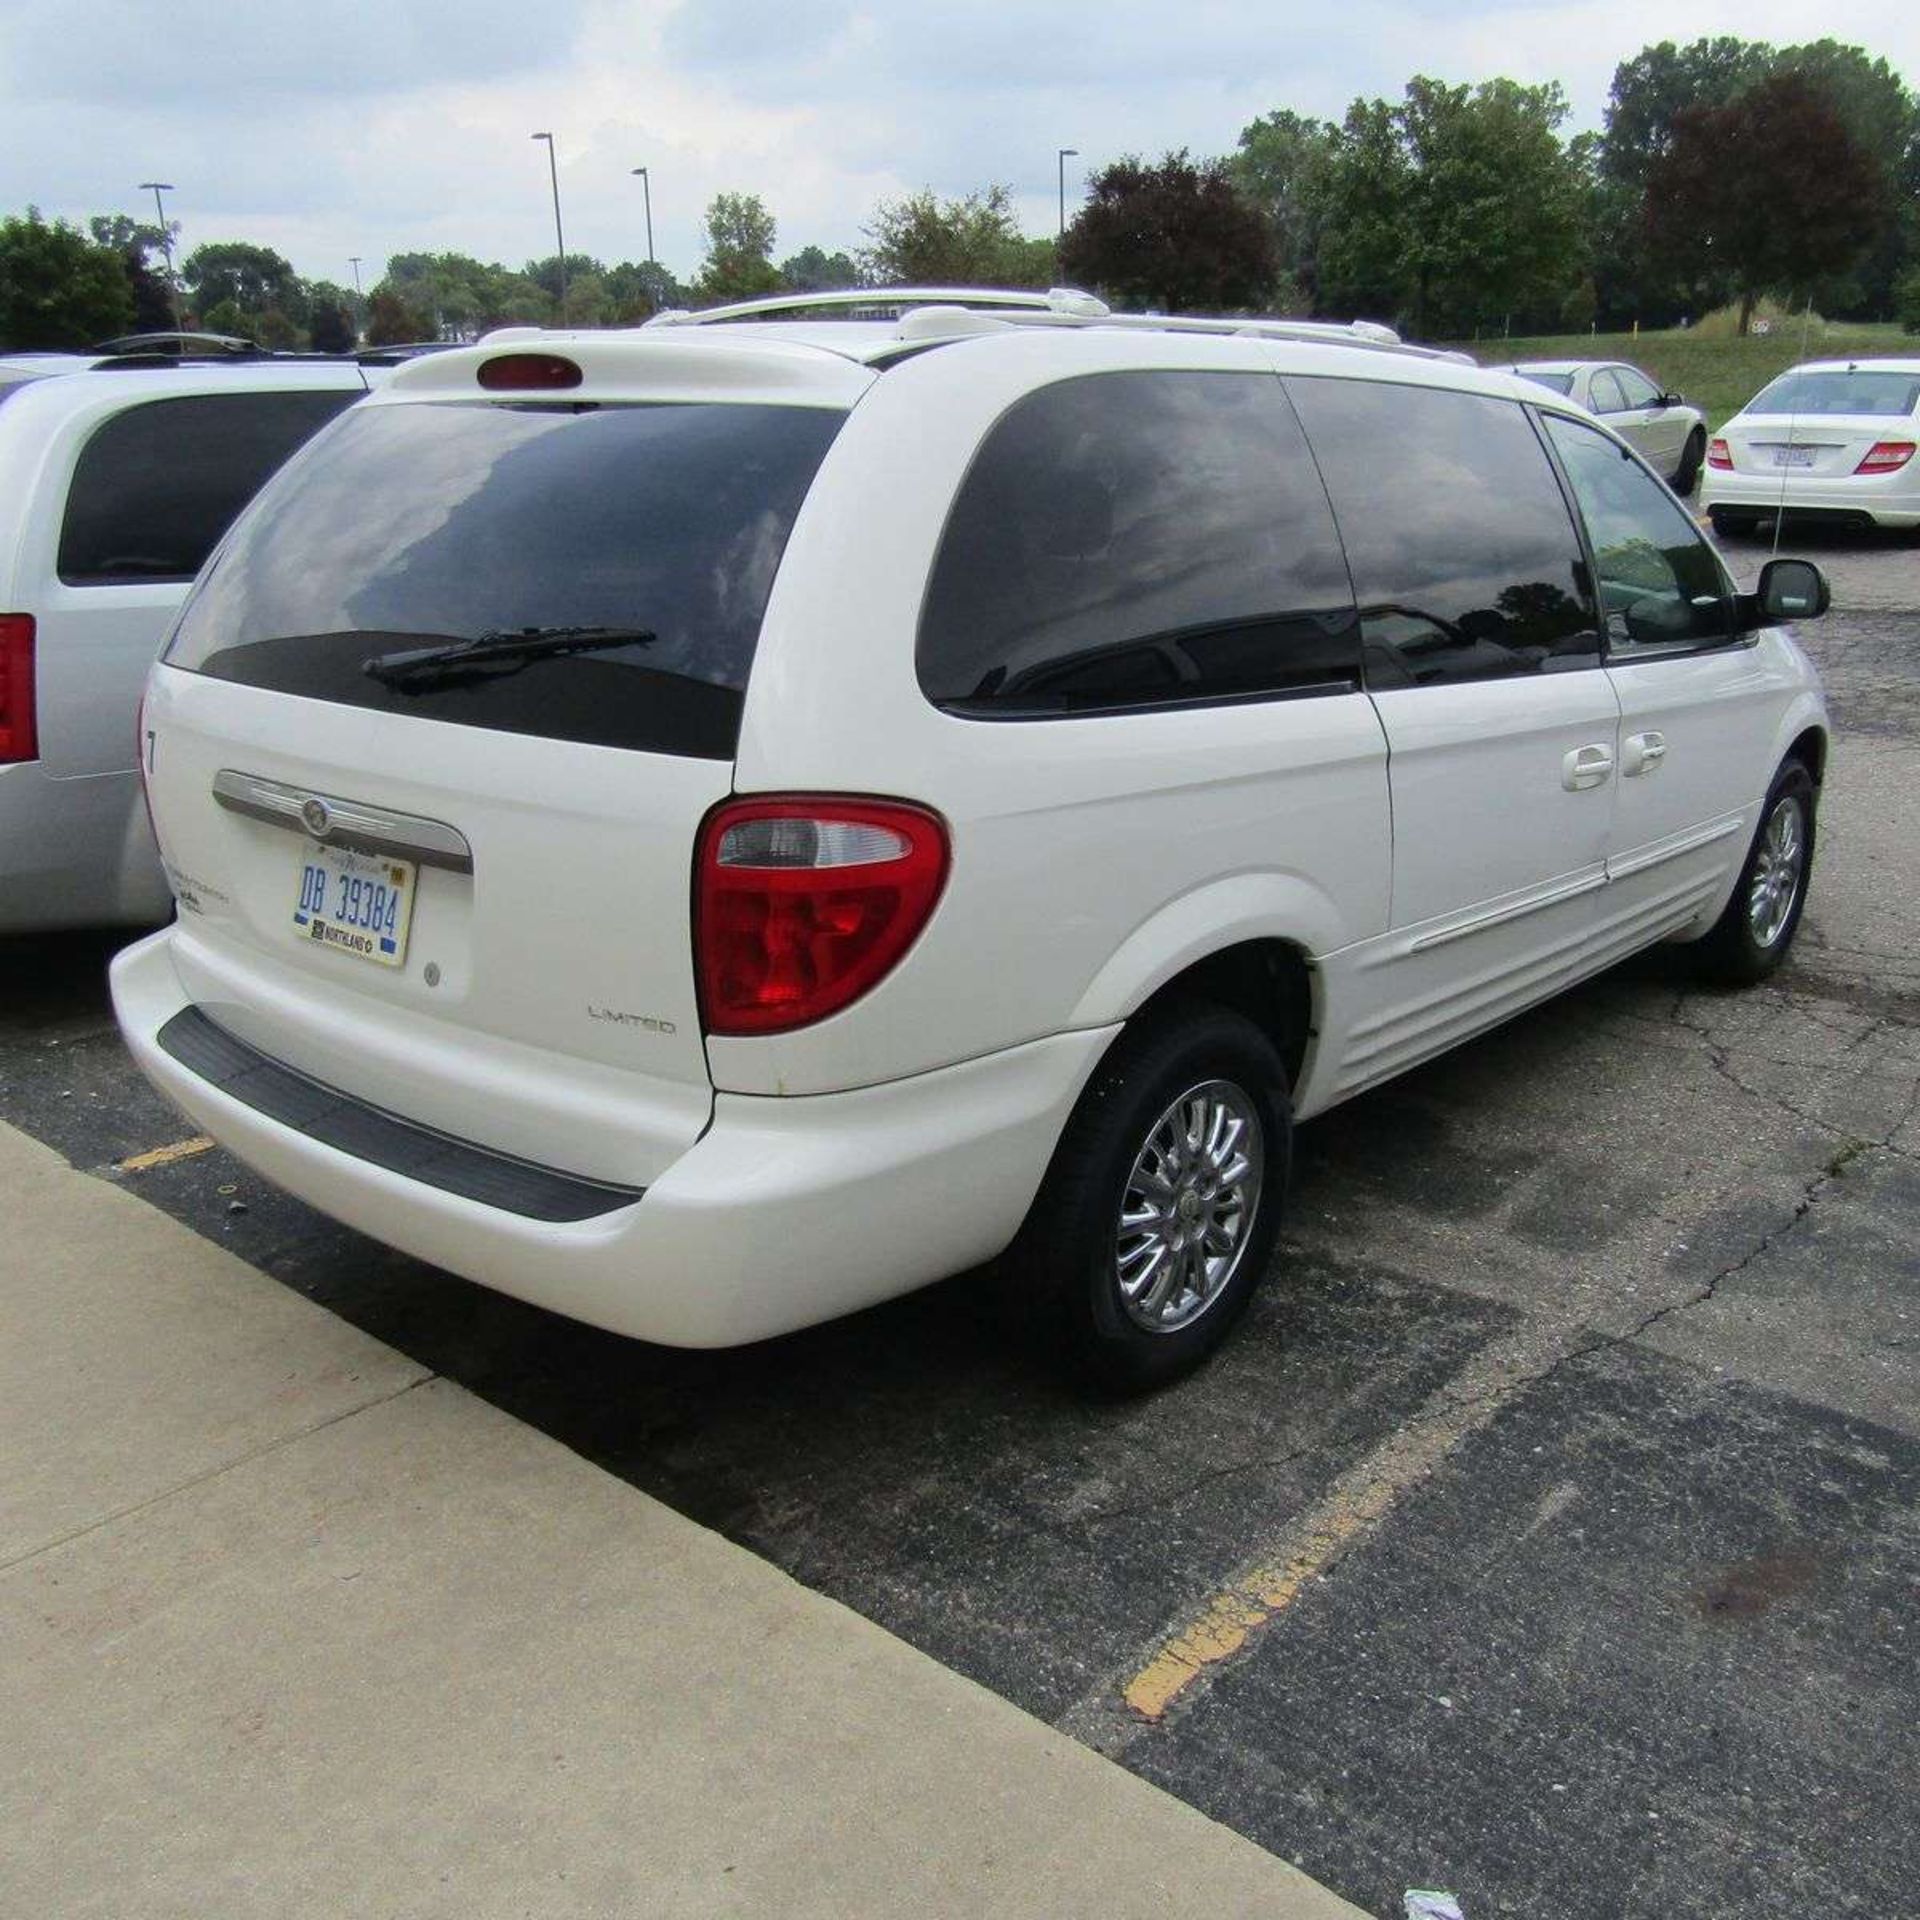 2003 Chrysler Town and Country Mini Van - Image 3 of 7